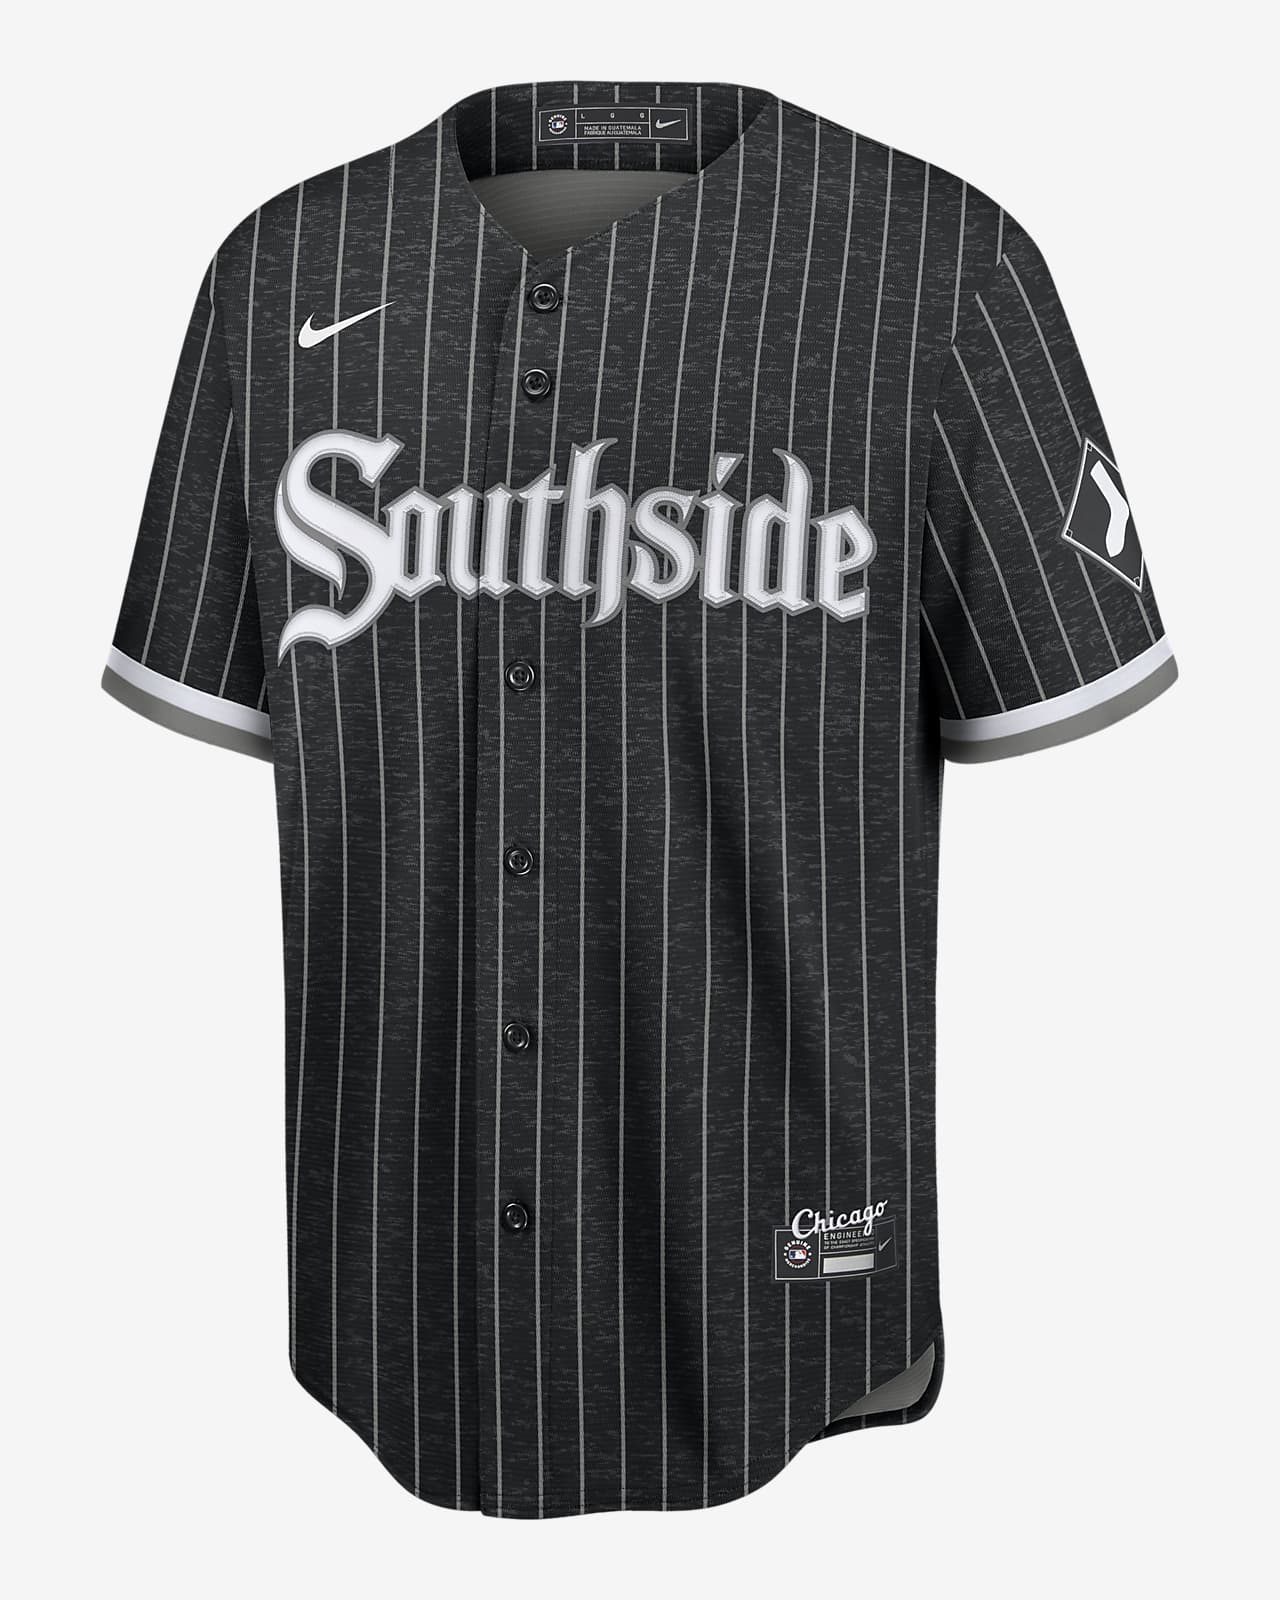 can you buy city connect jerseys